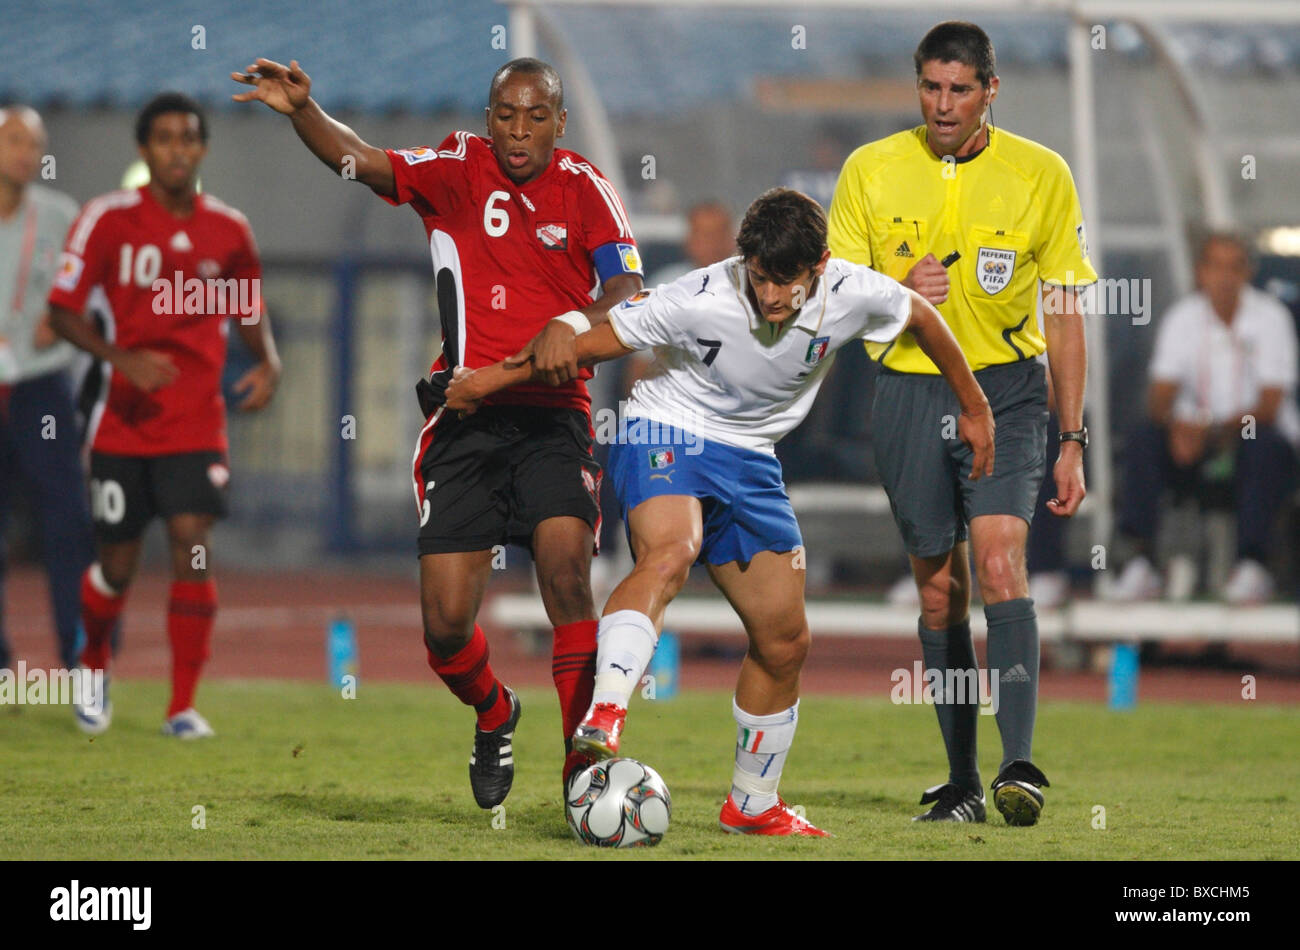 Leston Paul of Trinidad and Tobago (l) defends against Claudio Della Penna  of Italy (r) during a 2009 U-20 World Cup match Stock Photo - Alamy